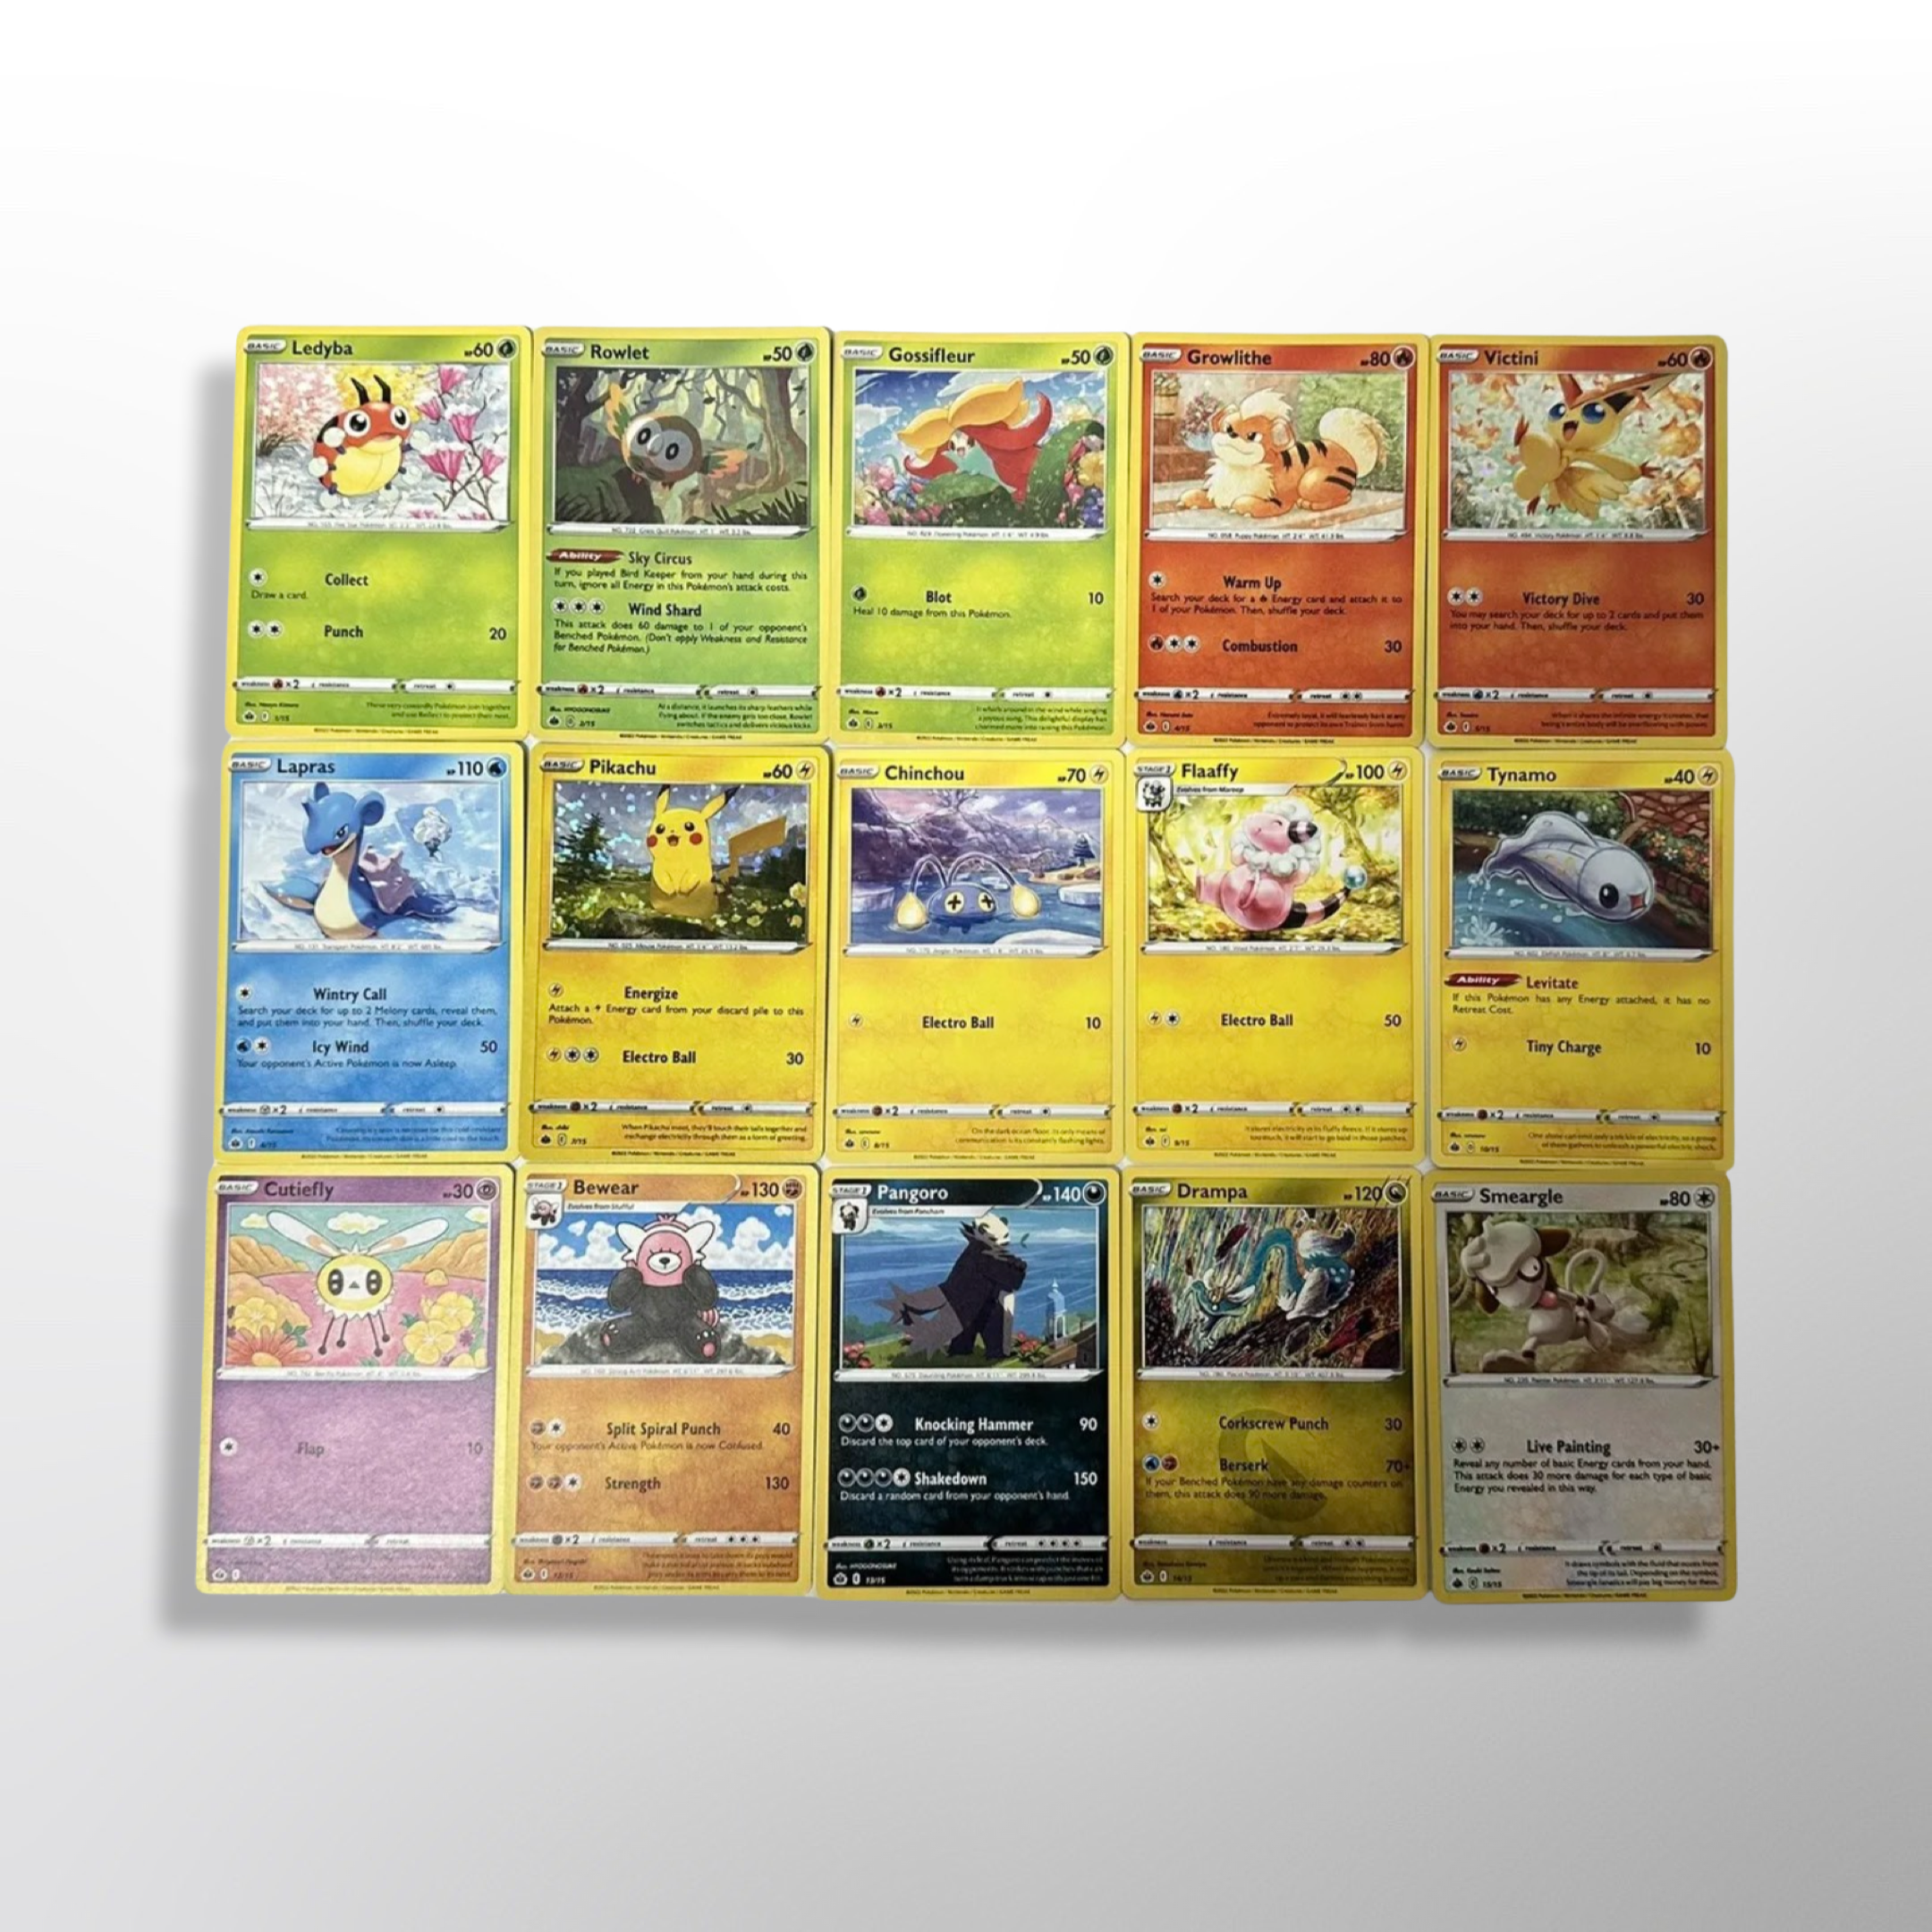 2022 McDONALD'S POKEMON - COMPLETE SET OF 15 CARDS - READY TO SHIP